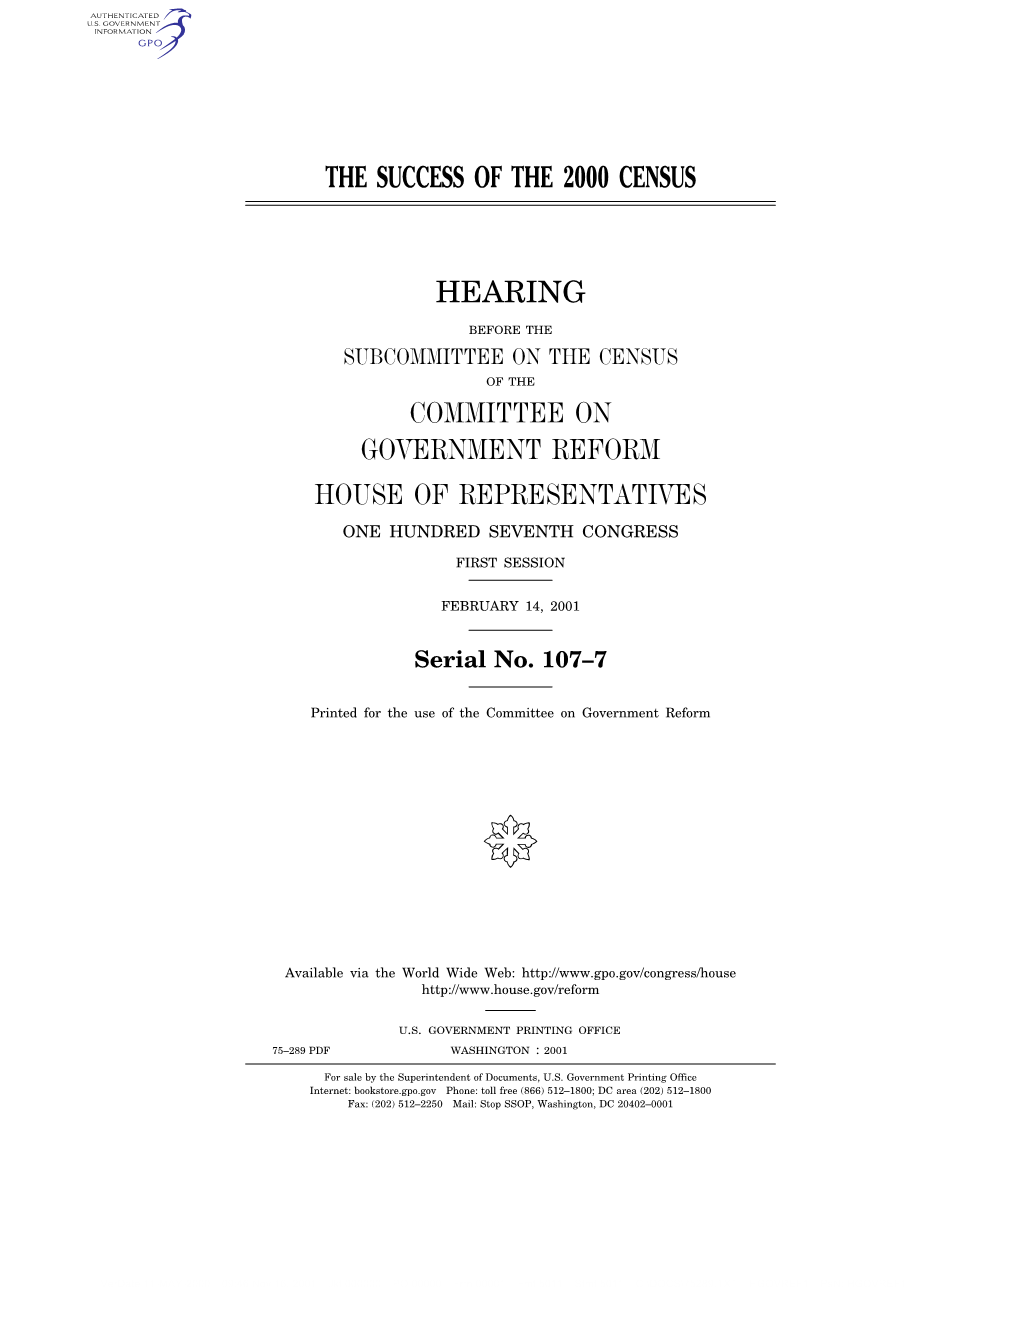 The Success of the 2000 Census Hearing Committee